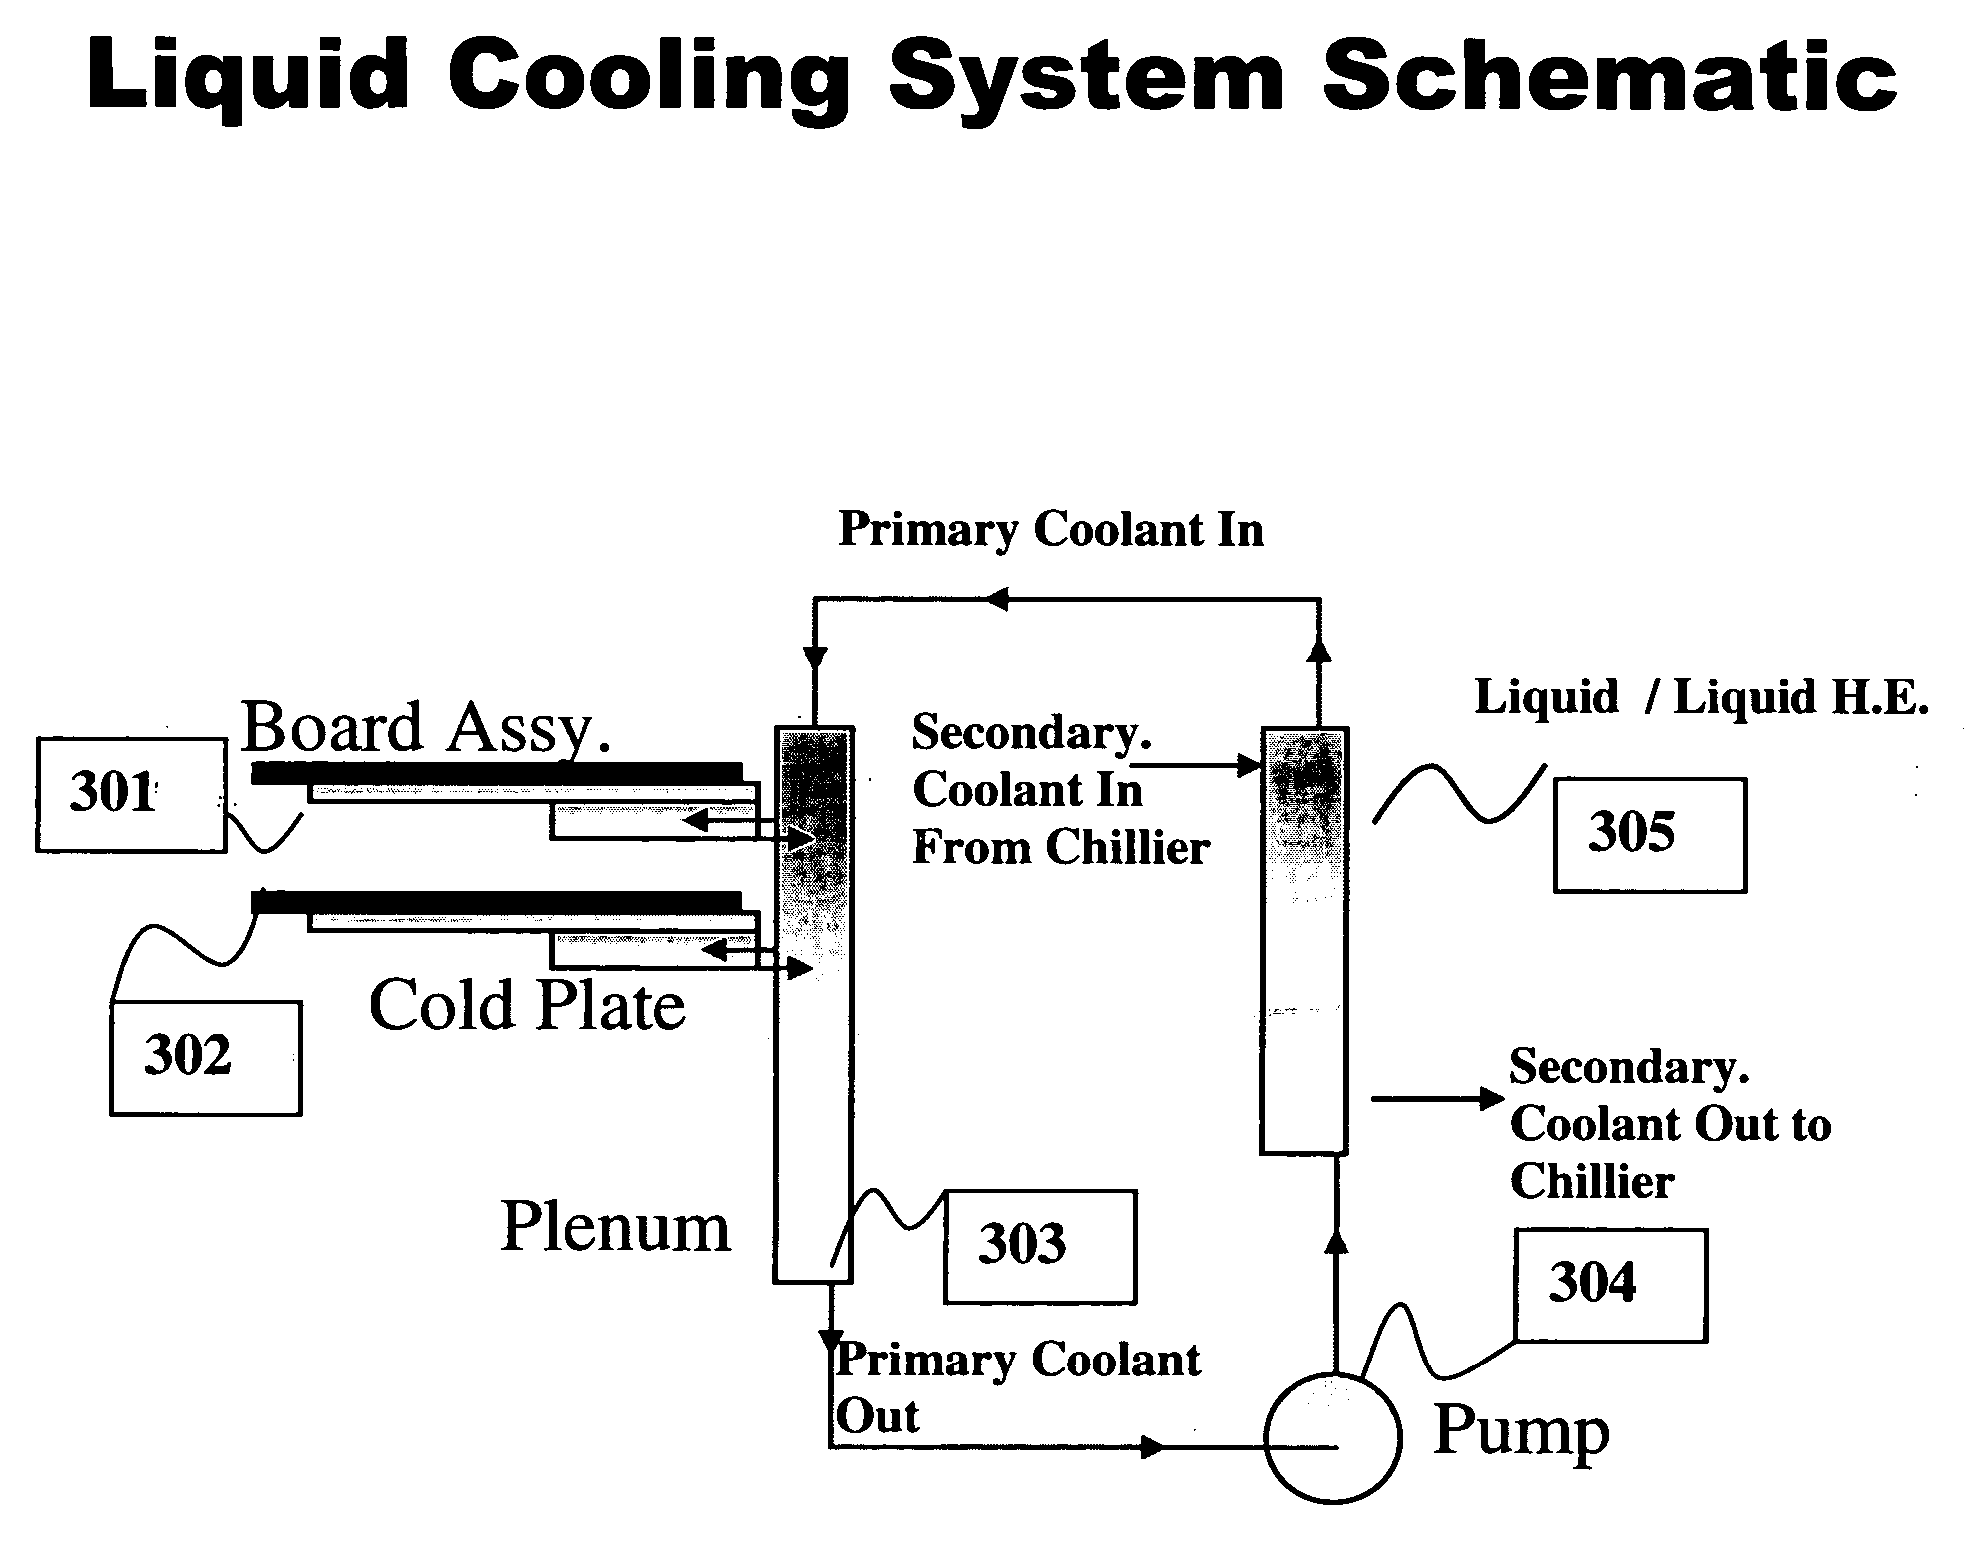 High performance cooling systems